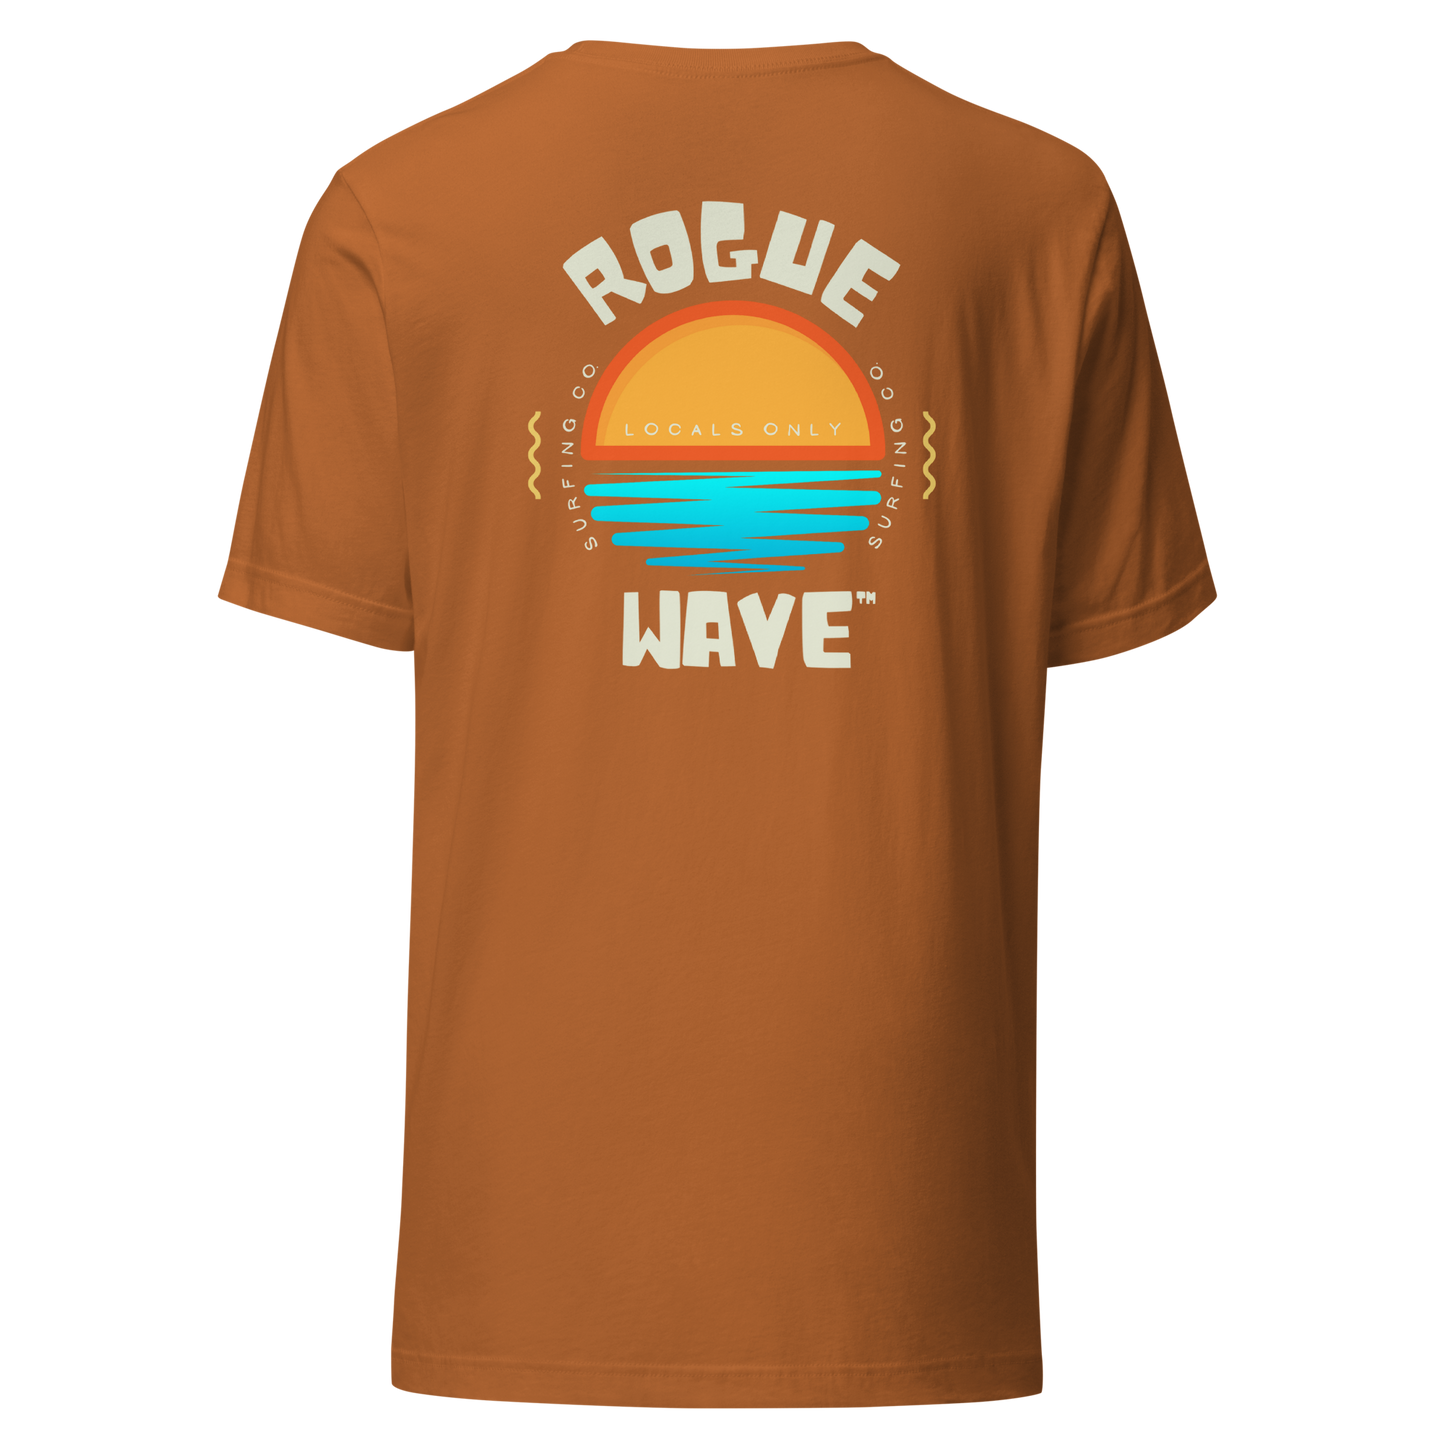 Rogue Wave Surfing Co™ Locals Only T-Shirt